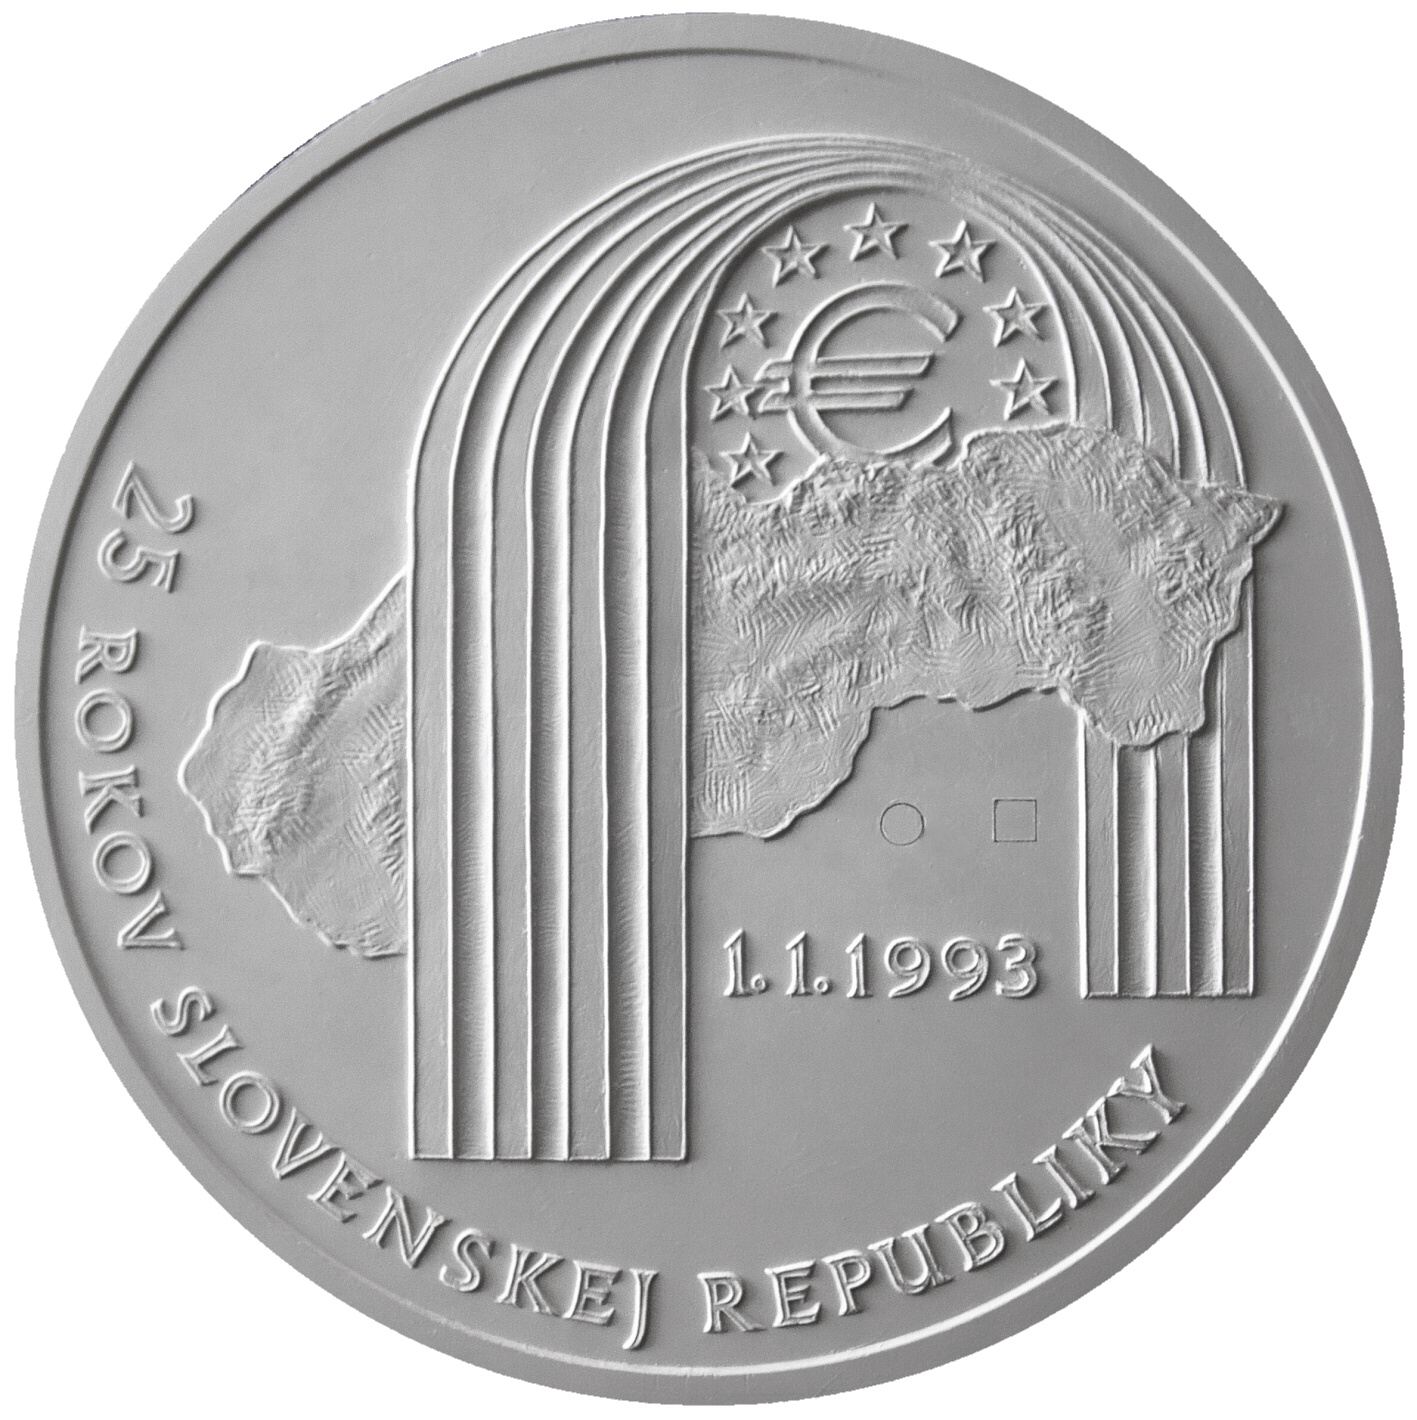 Reduced first prize and the design selected for the coin